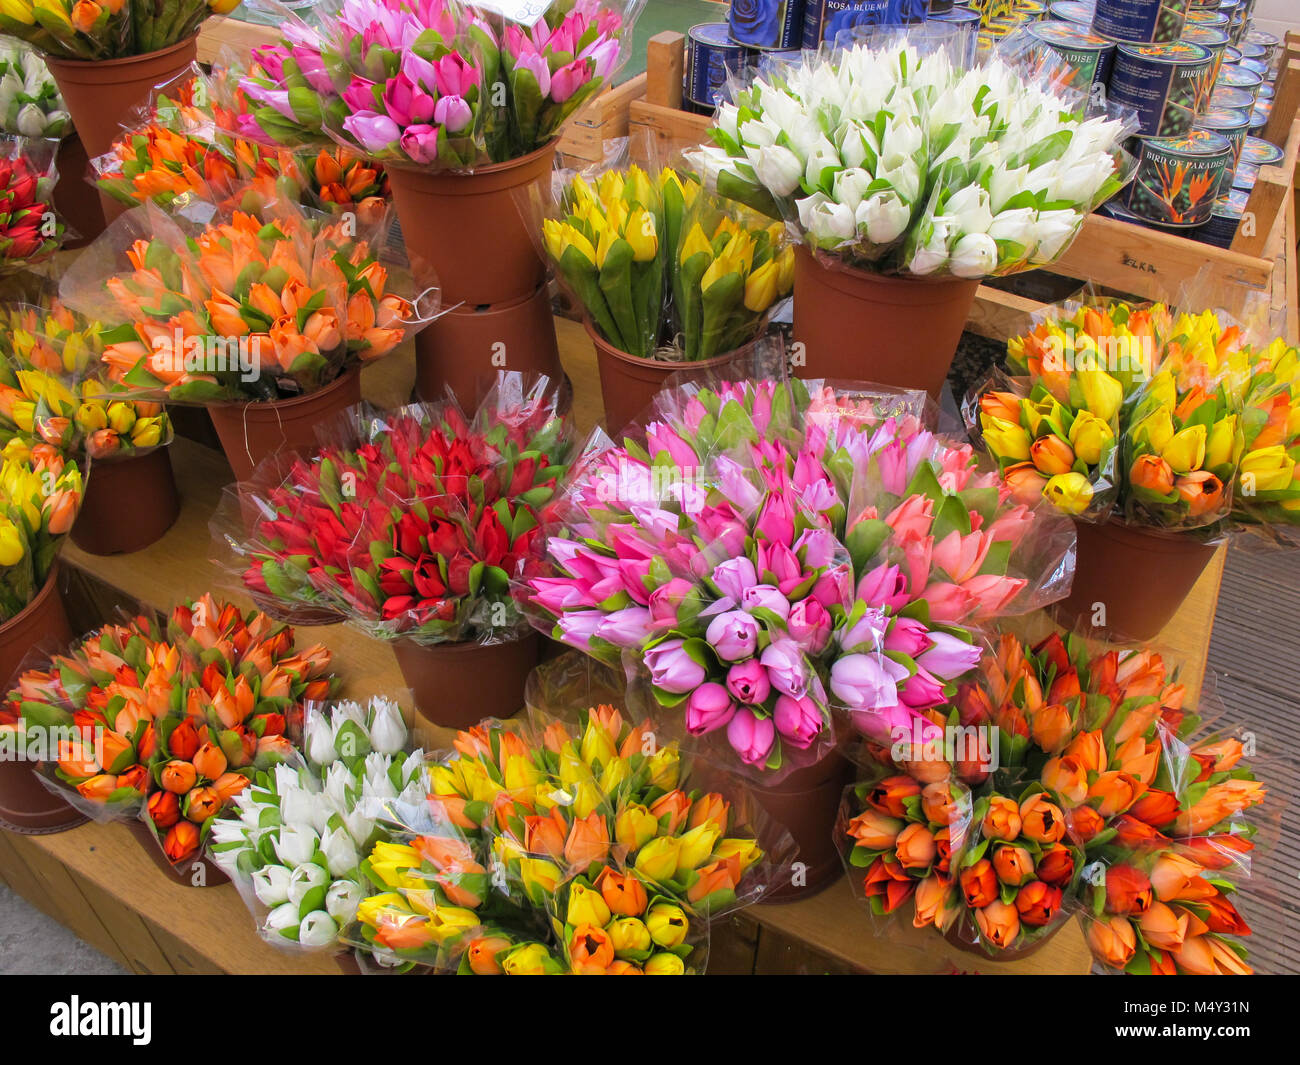 Tulips for date, Amsterdam Stock Photo